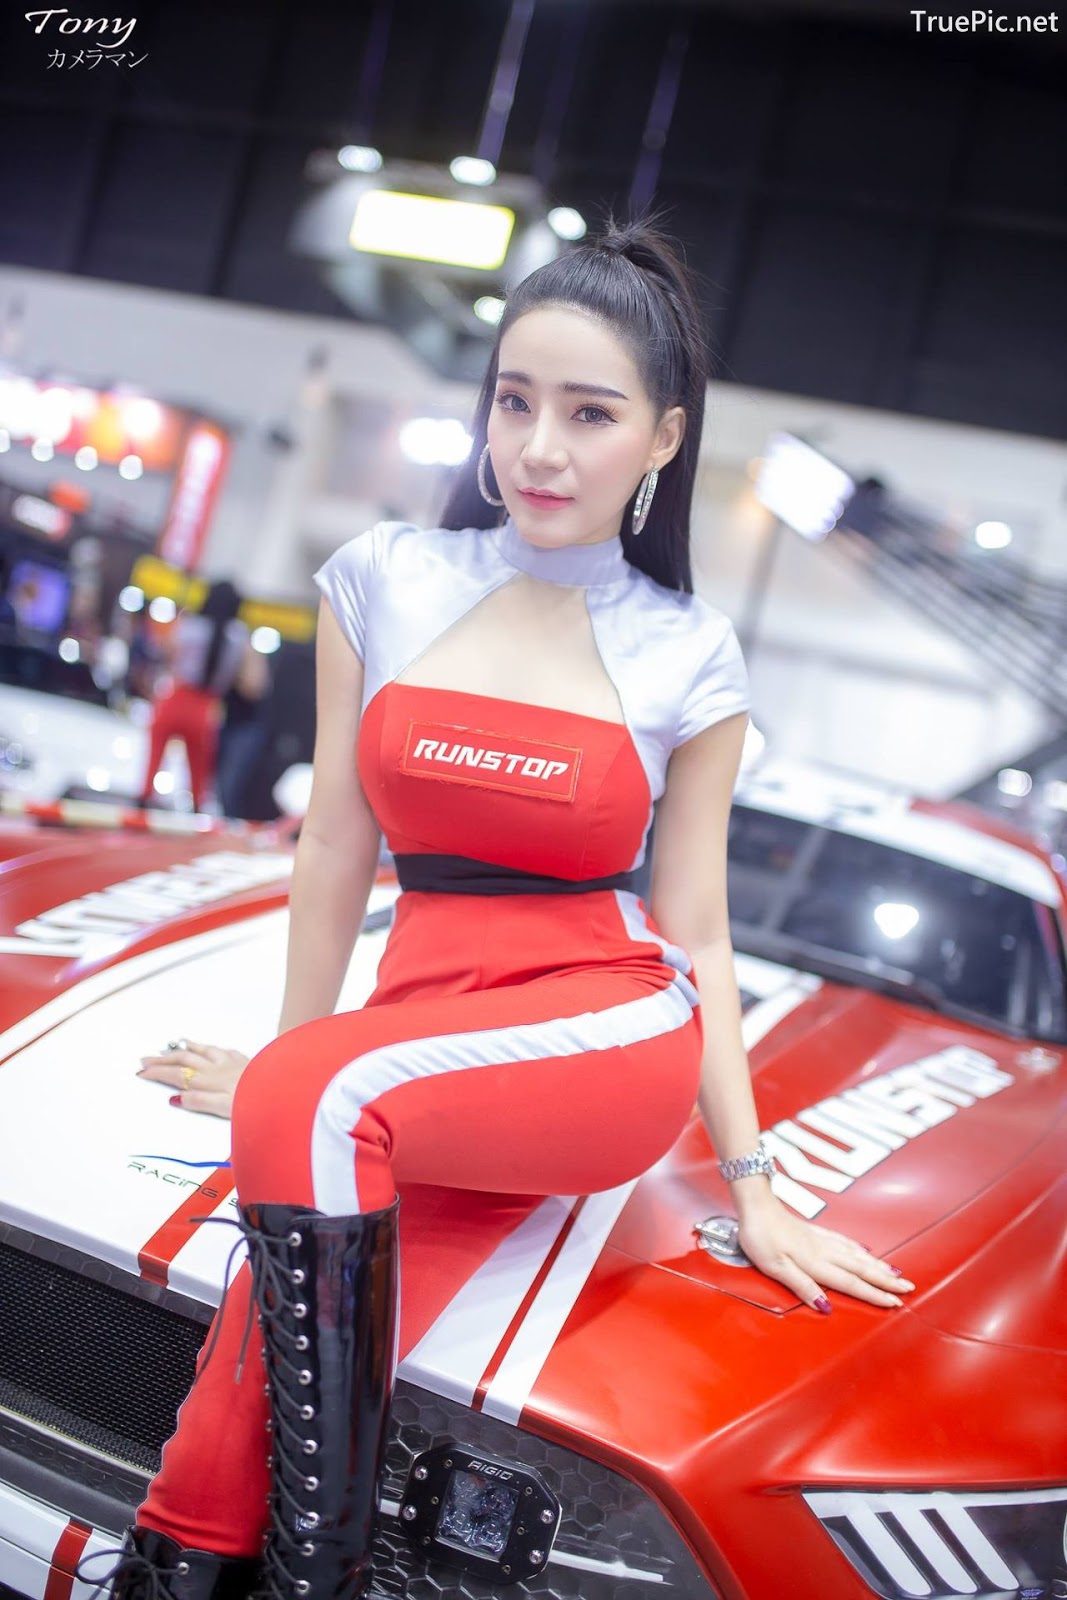 Image-Thailand-Hot-Model-Thai-Racing-Girl-At-Motor-Expo-2018-TruePic.net- Picture-119